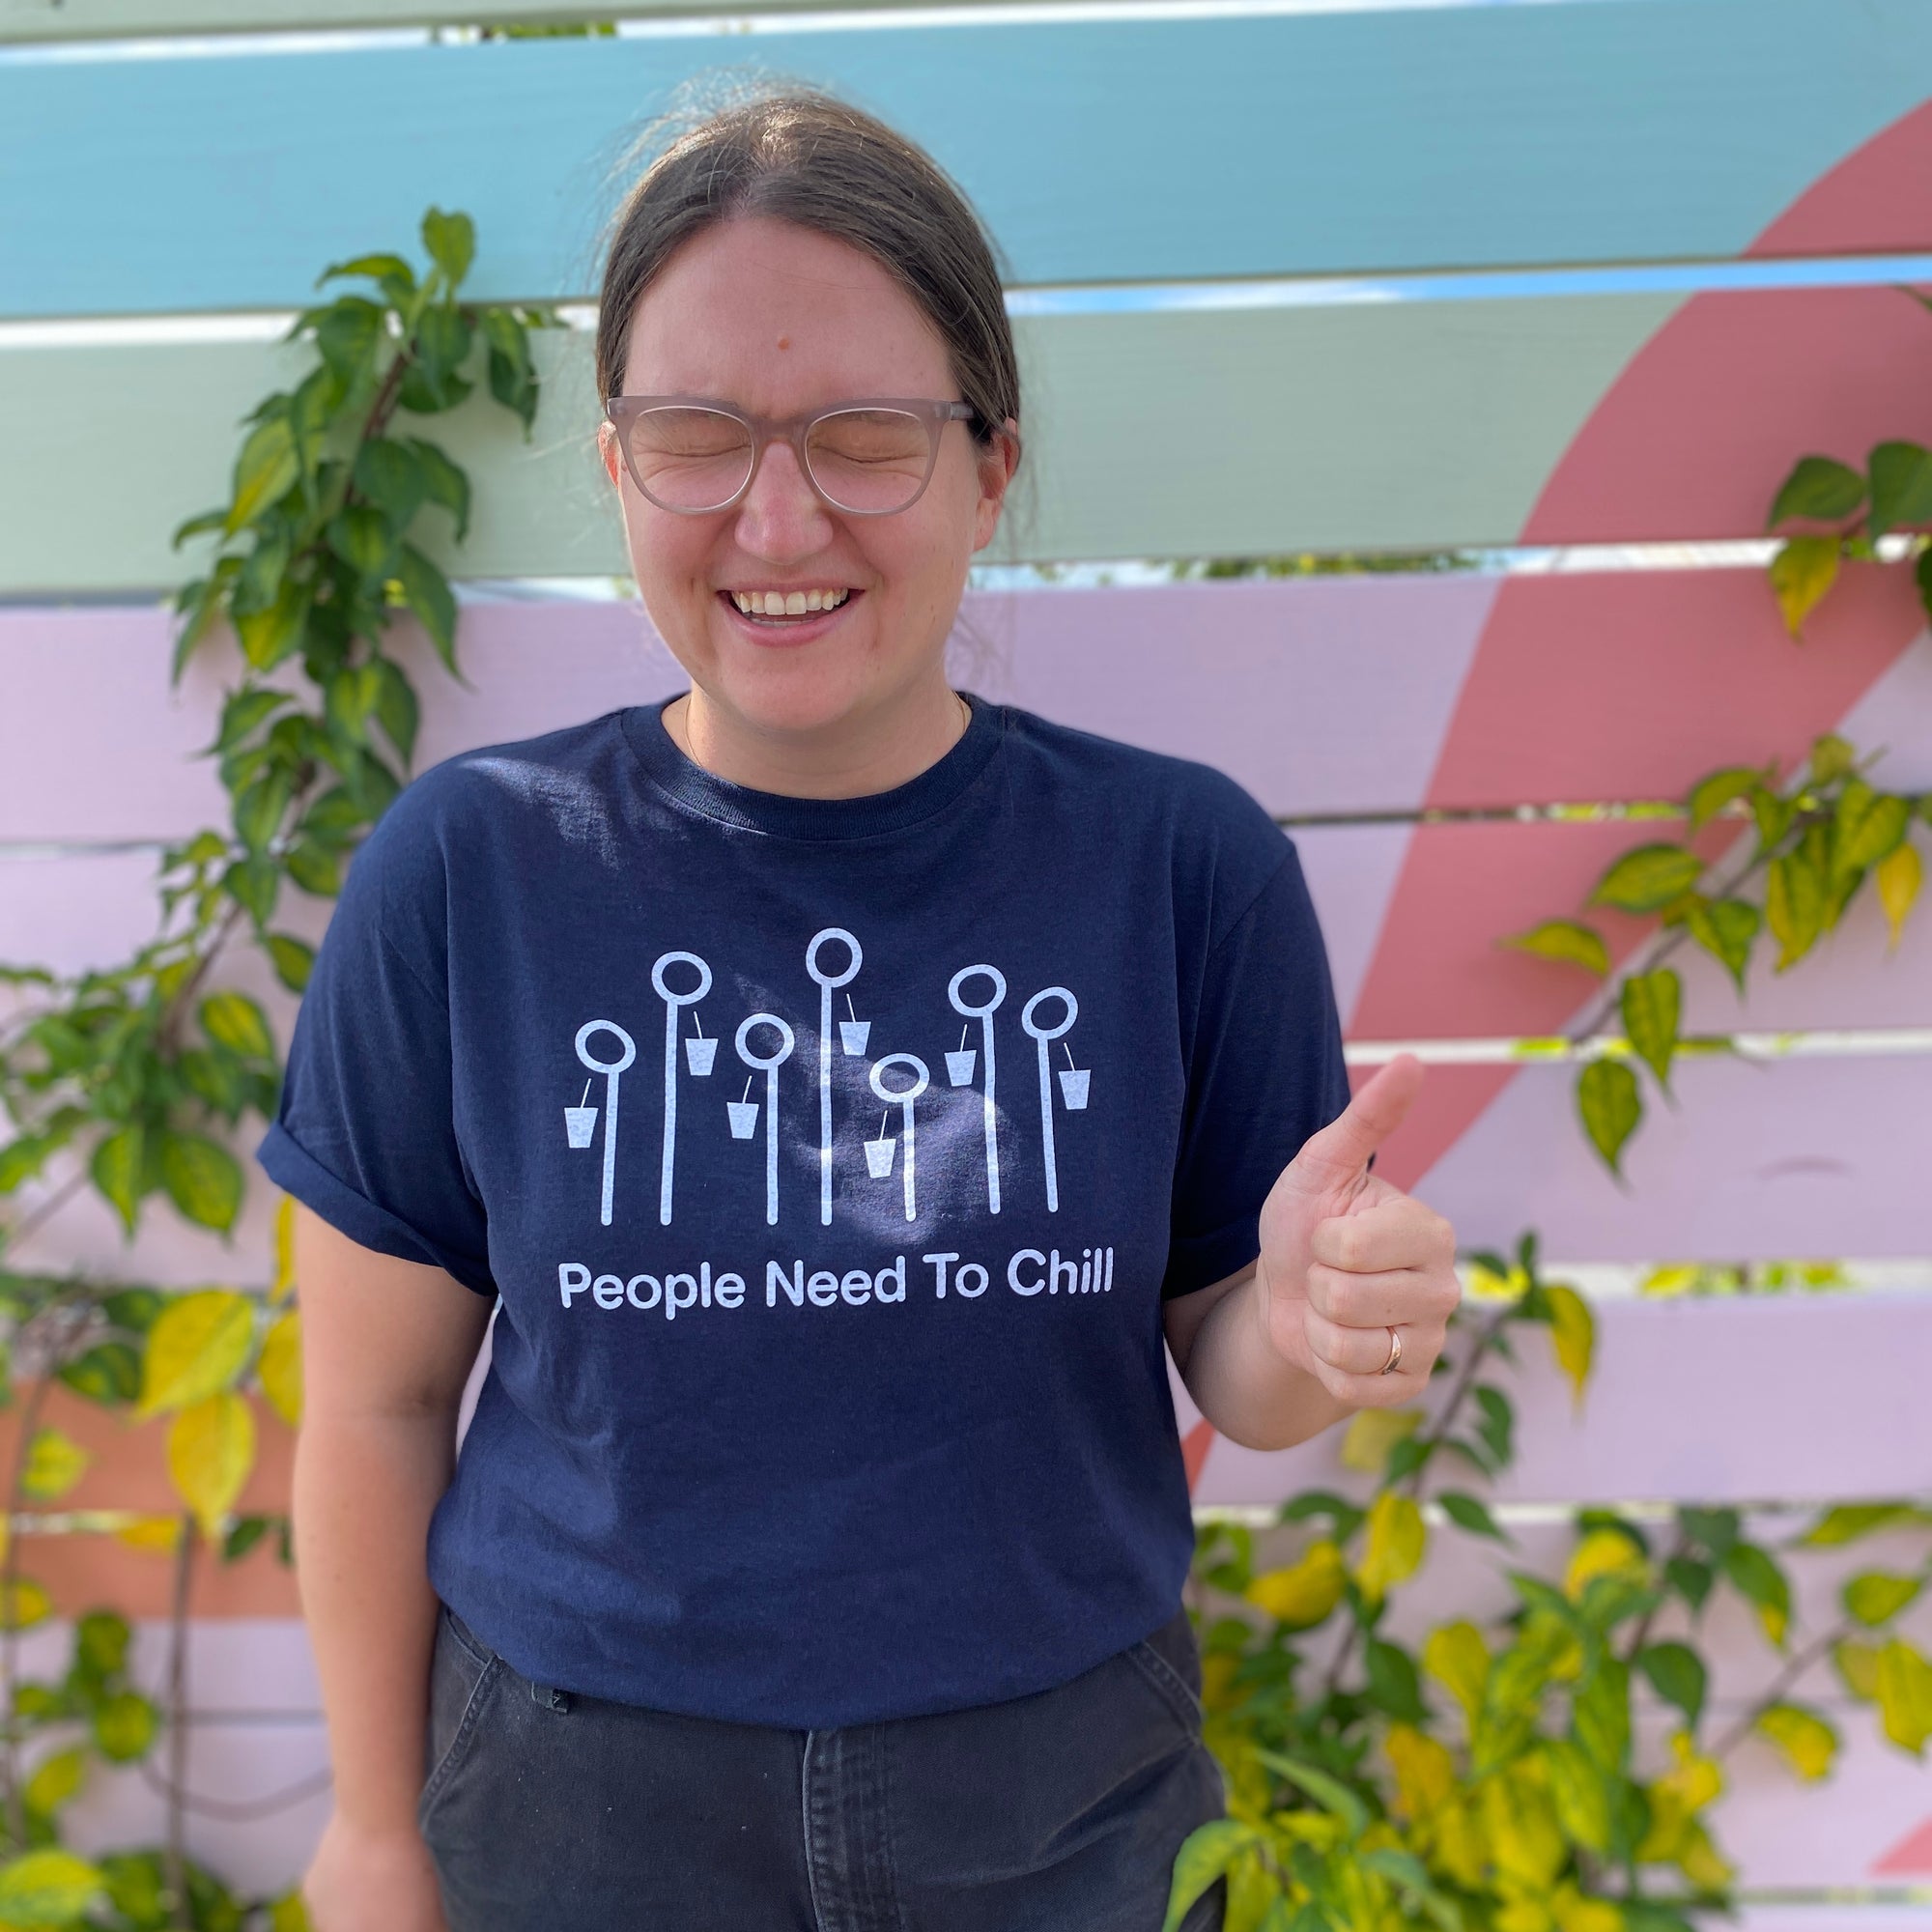 A young woman in glasses, smiling and giving a thumbs up, wearing a navy blue Tandem Coffee Roasters "People Need To Chill" Tee in front of a colorful striped background with greenery.